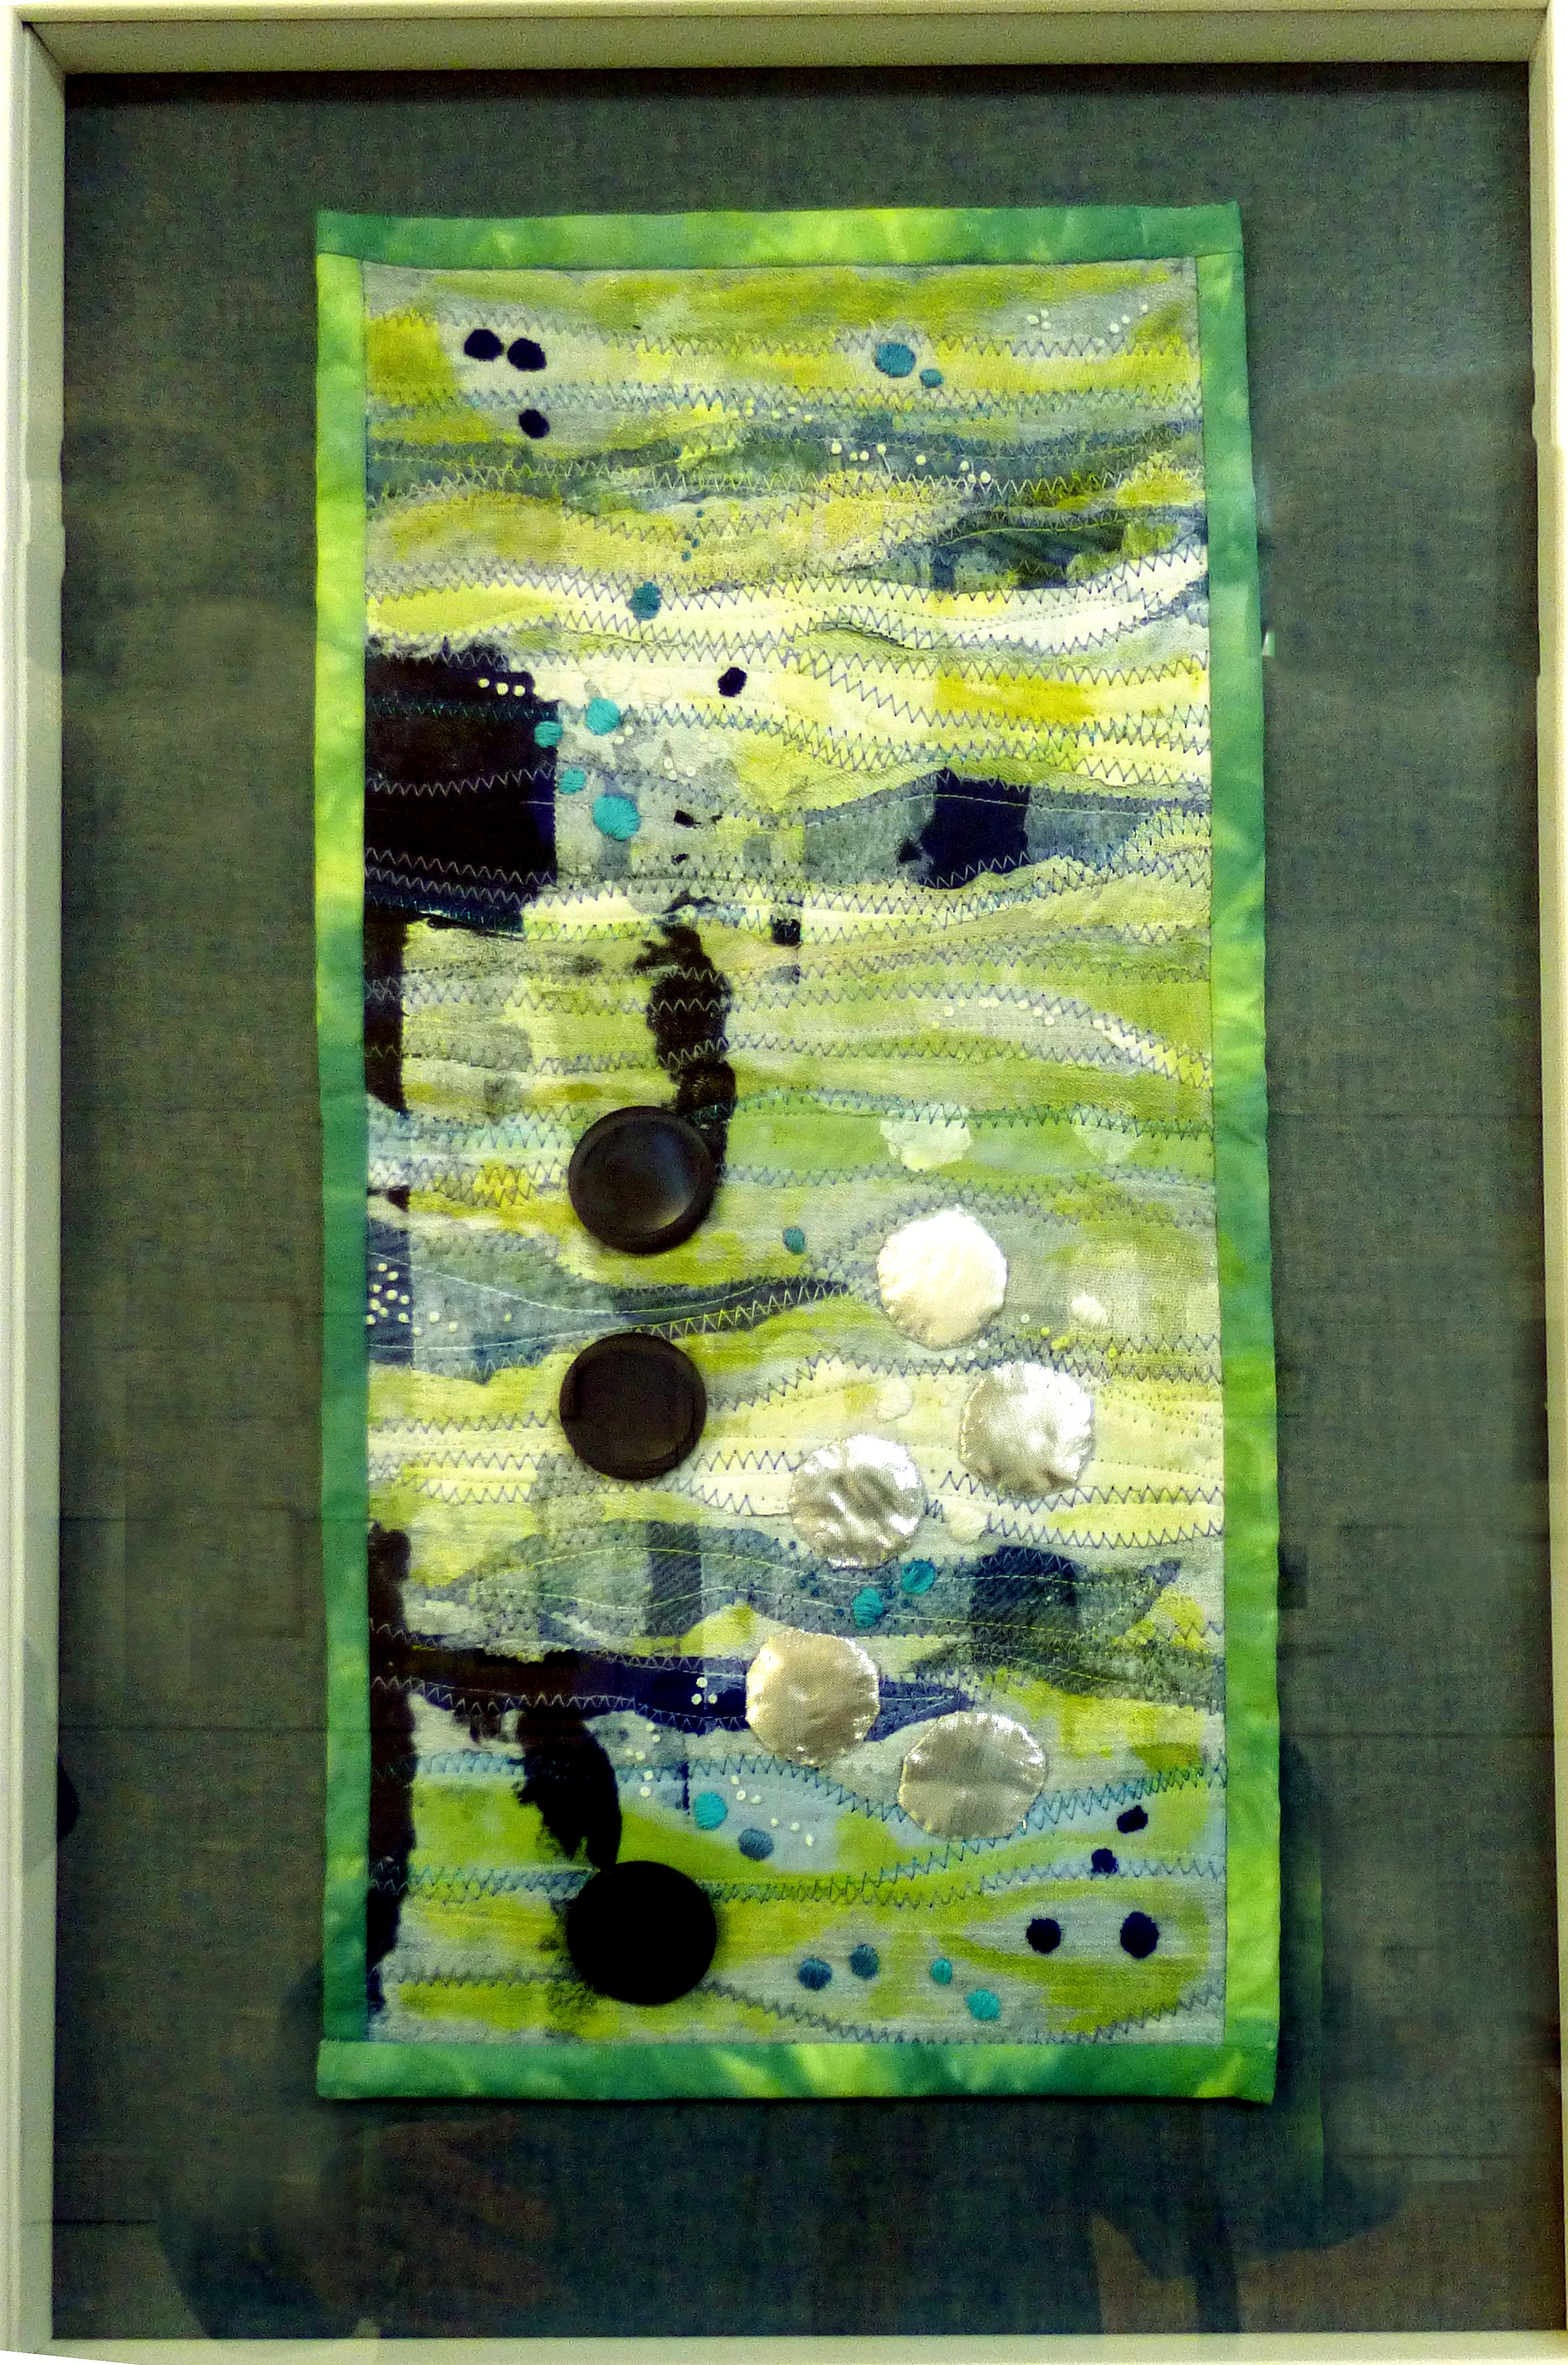 BUBBLES by Sue Boardman, fabric collage with buttons, ConText group 2018